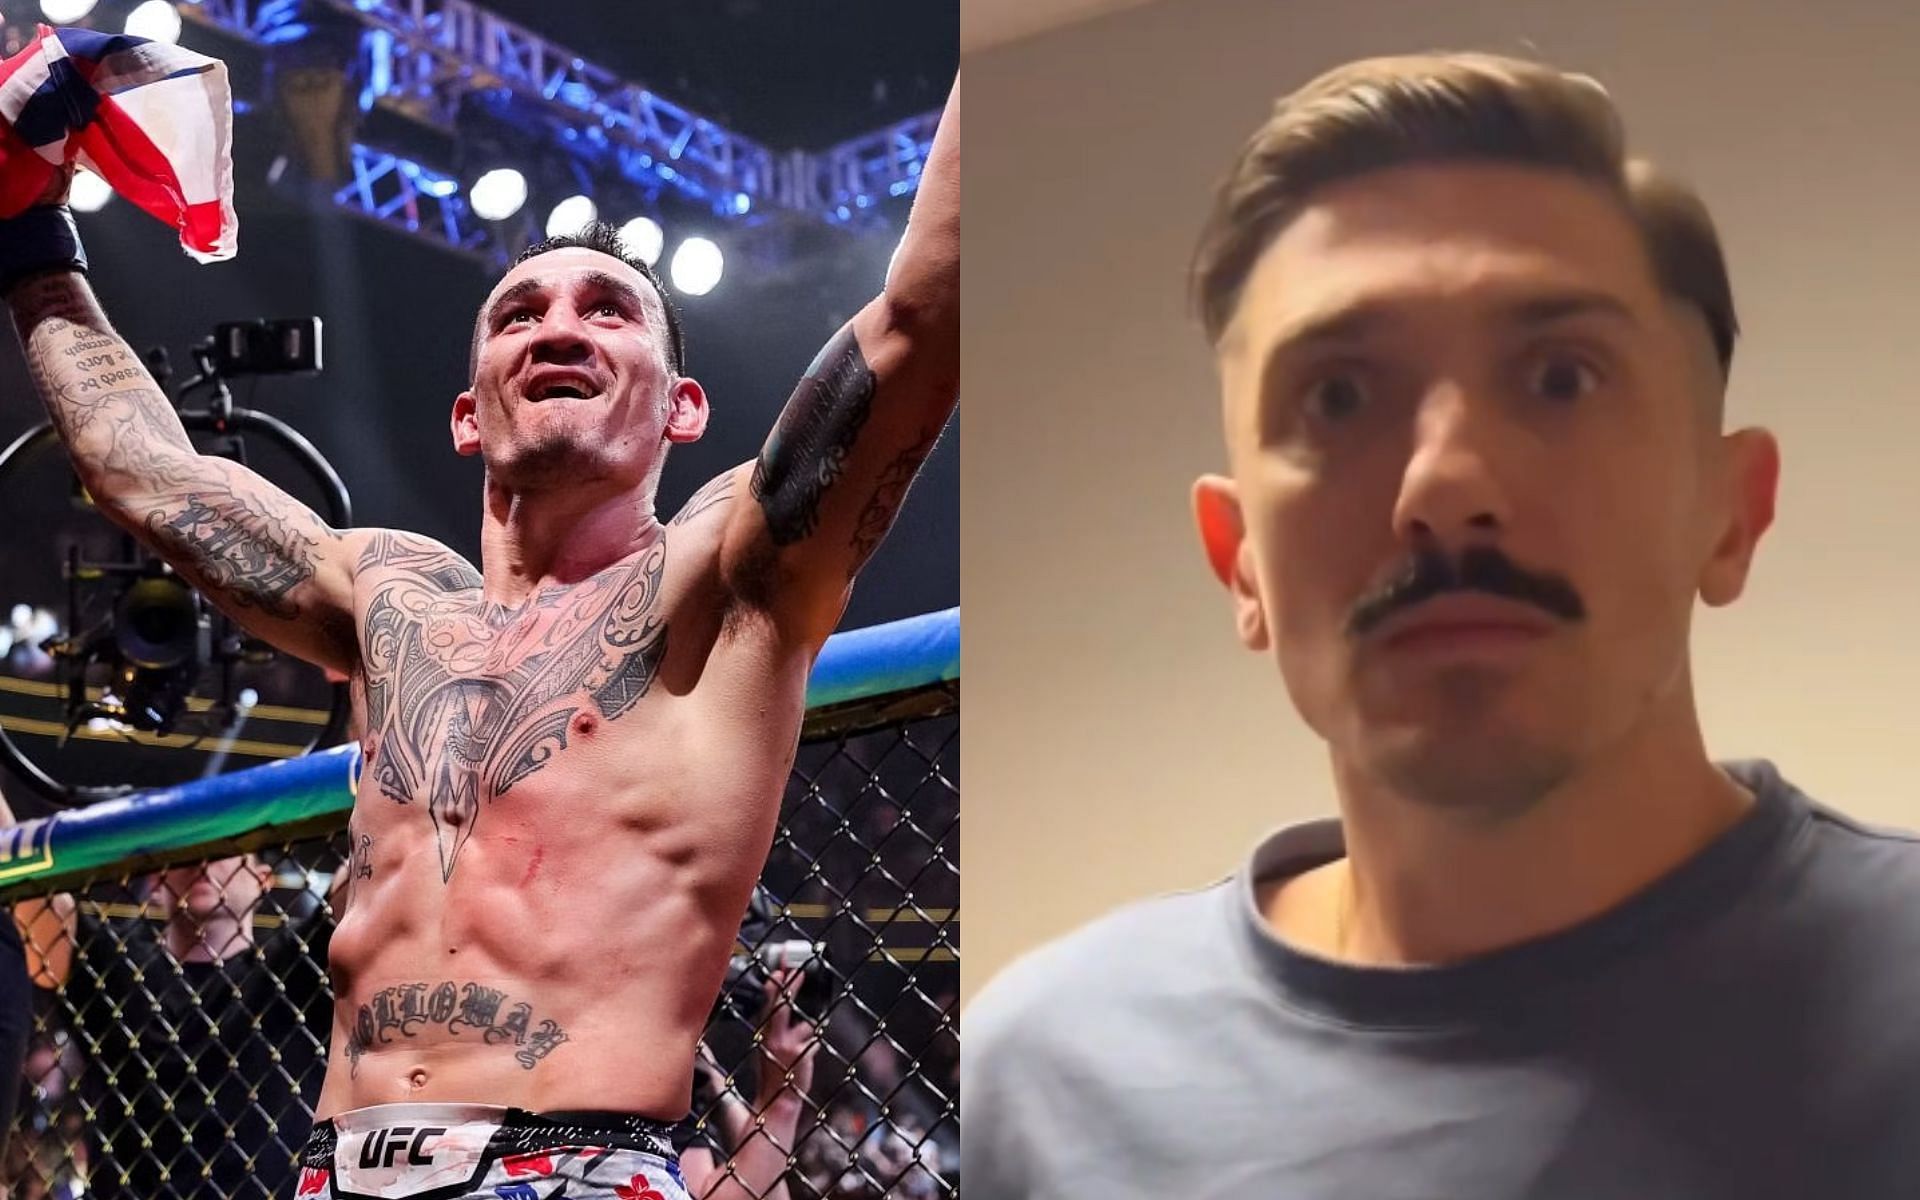 Andrew Schulz was left astounded by Max Holloway&rsquo;s &ldquo;let&rsquo;s bang&rdquo; moment at UFC 300 against Justin Gaethje [Image courtesy: Getty Images, and @andrewschulz - Instagram]